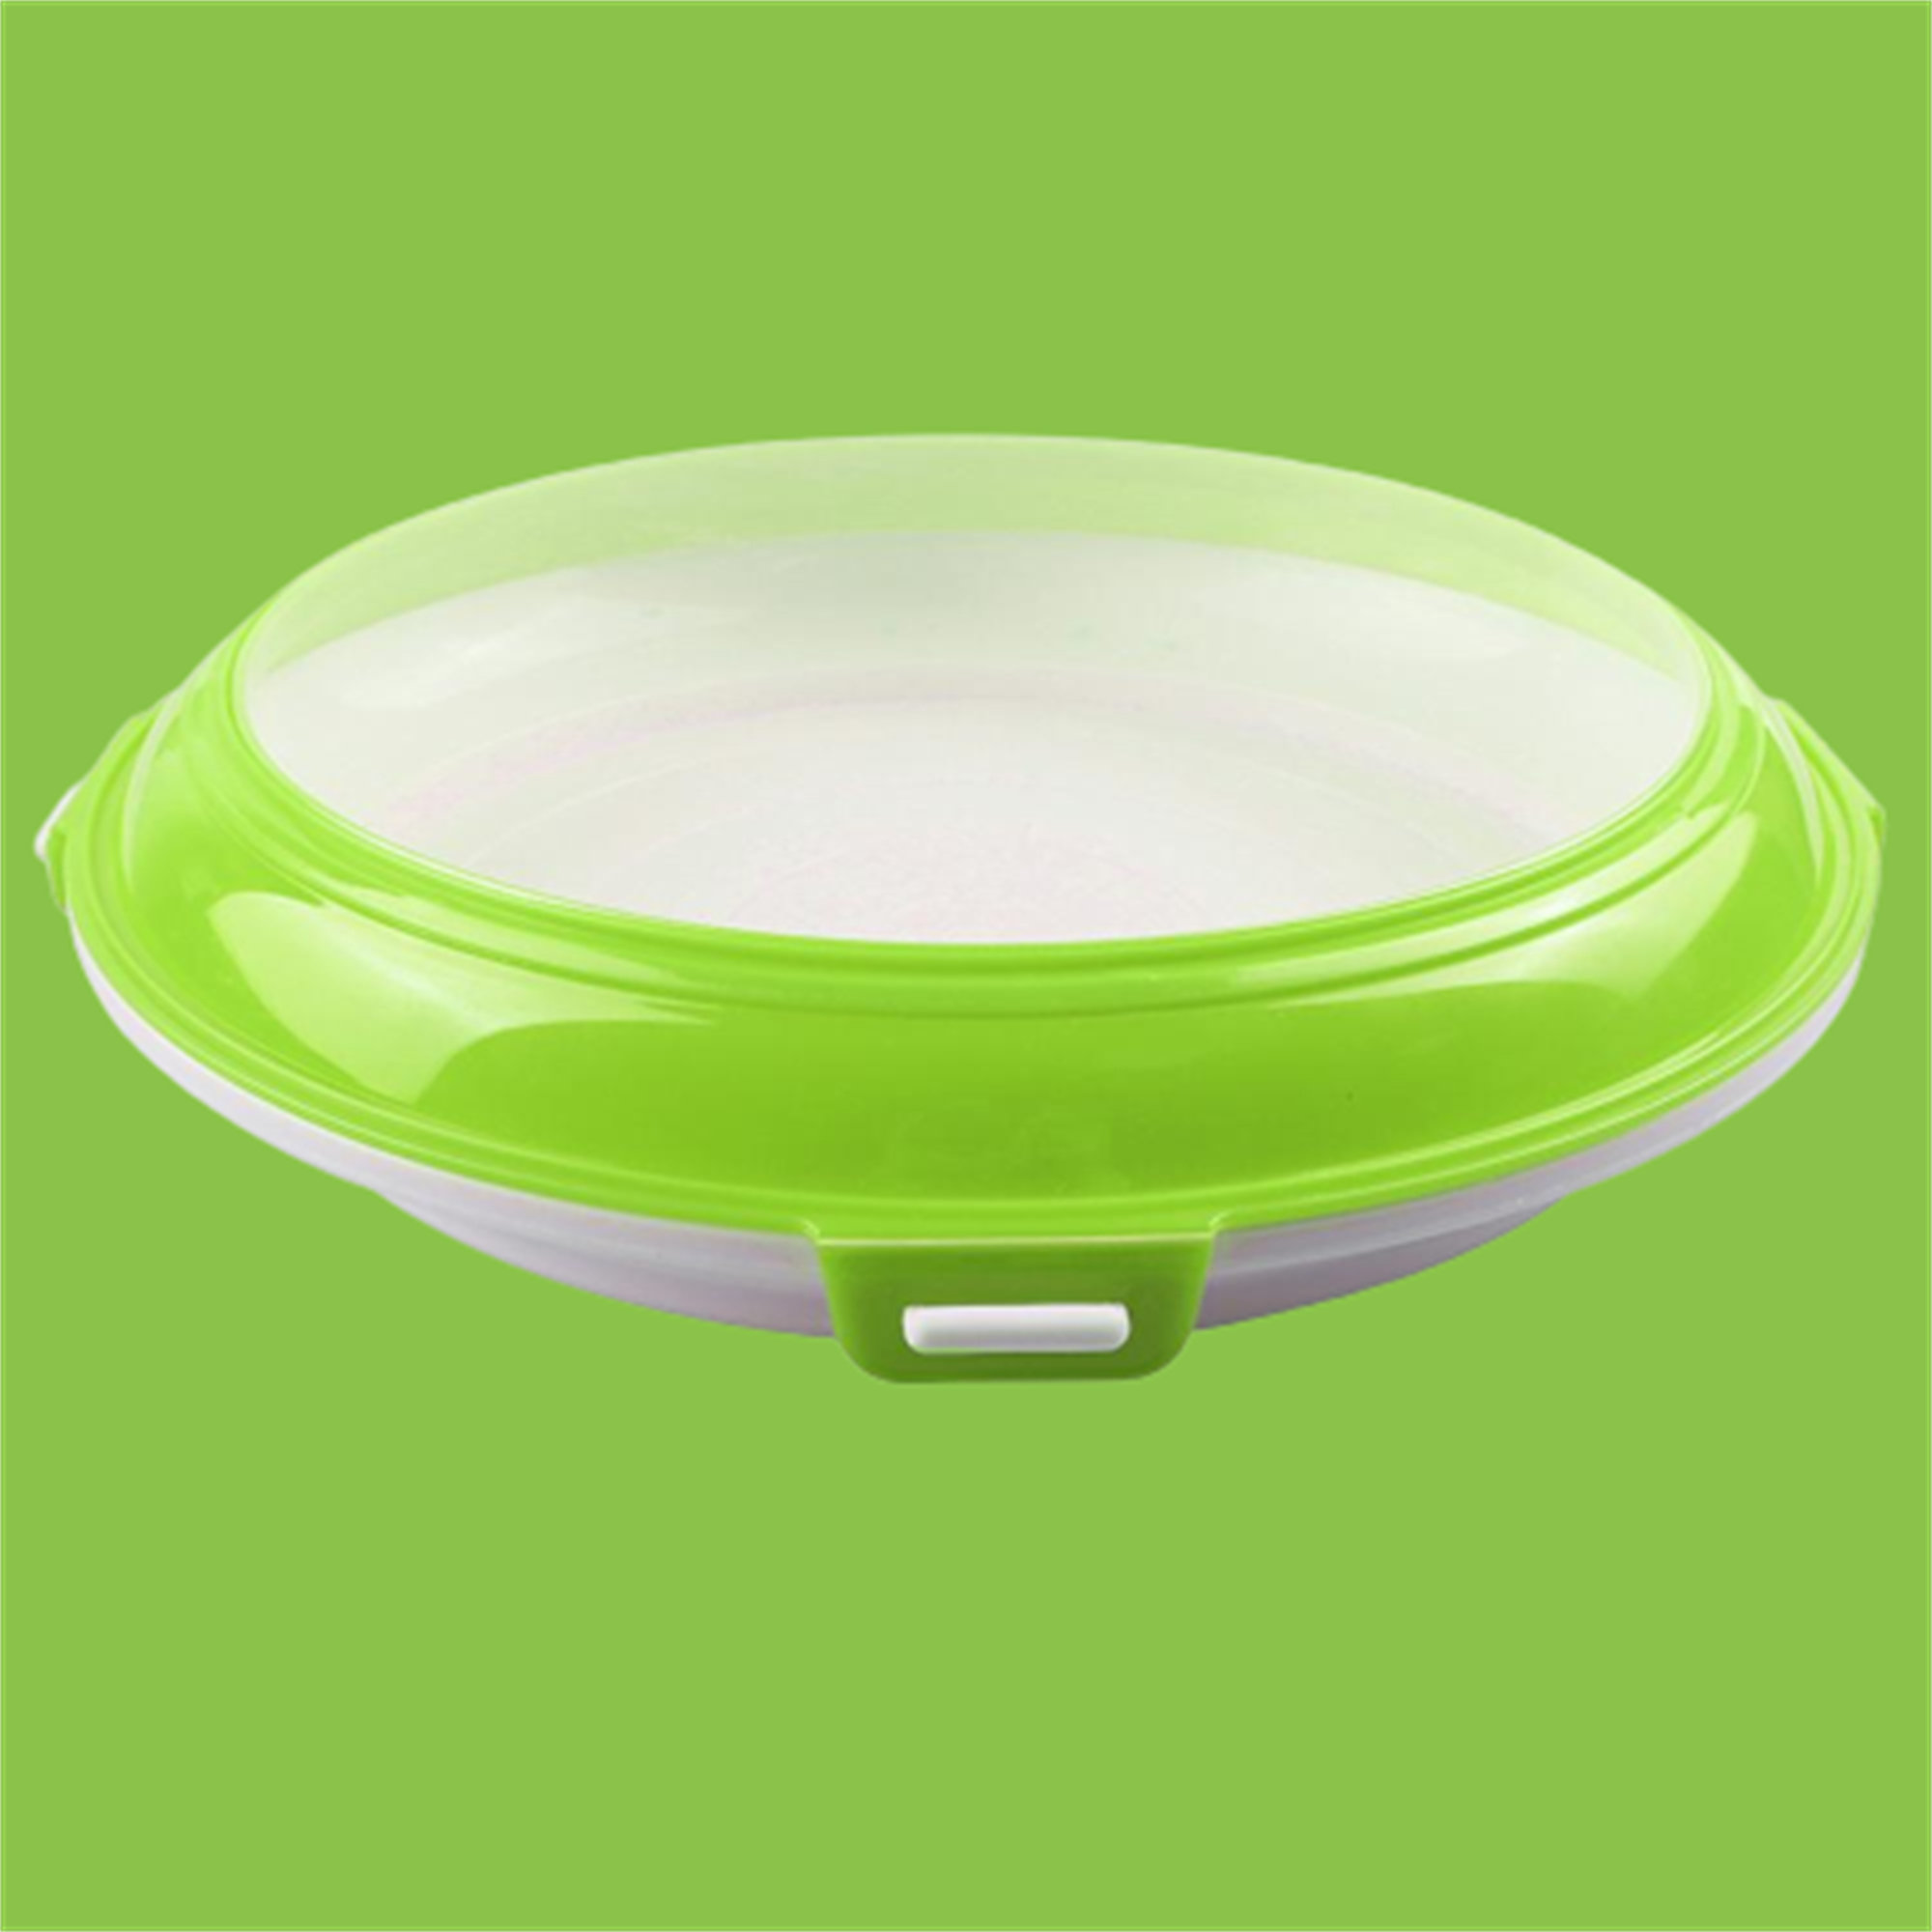 Chef Craft Classic Microwave Cover, 10 inches in Diameter, Clear